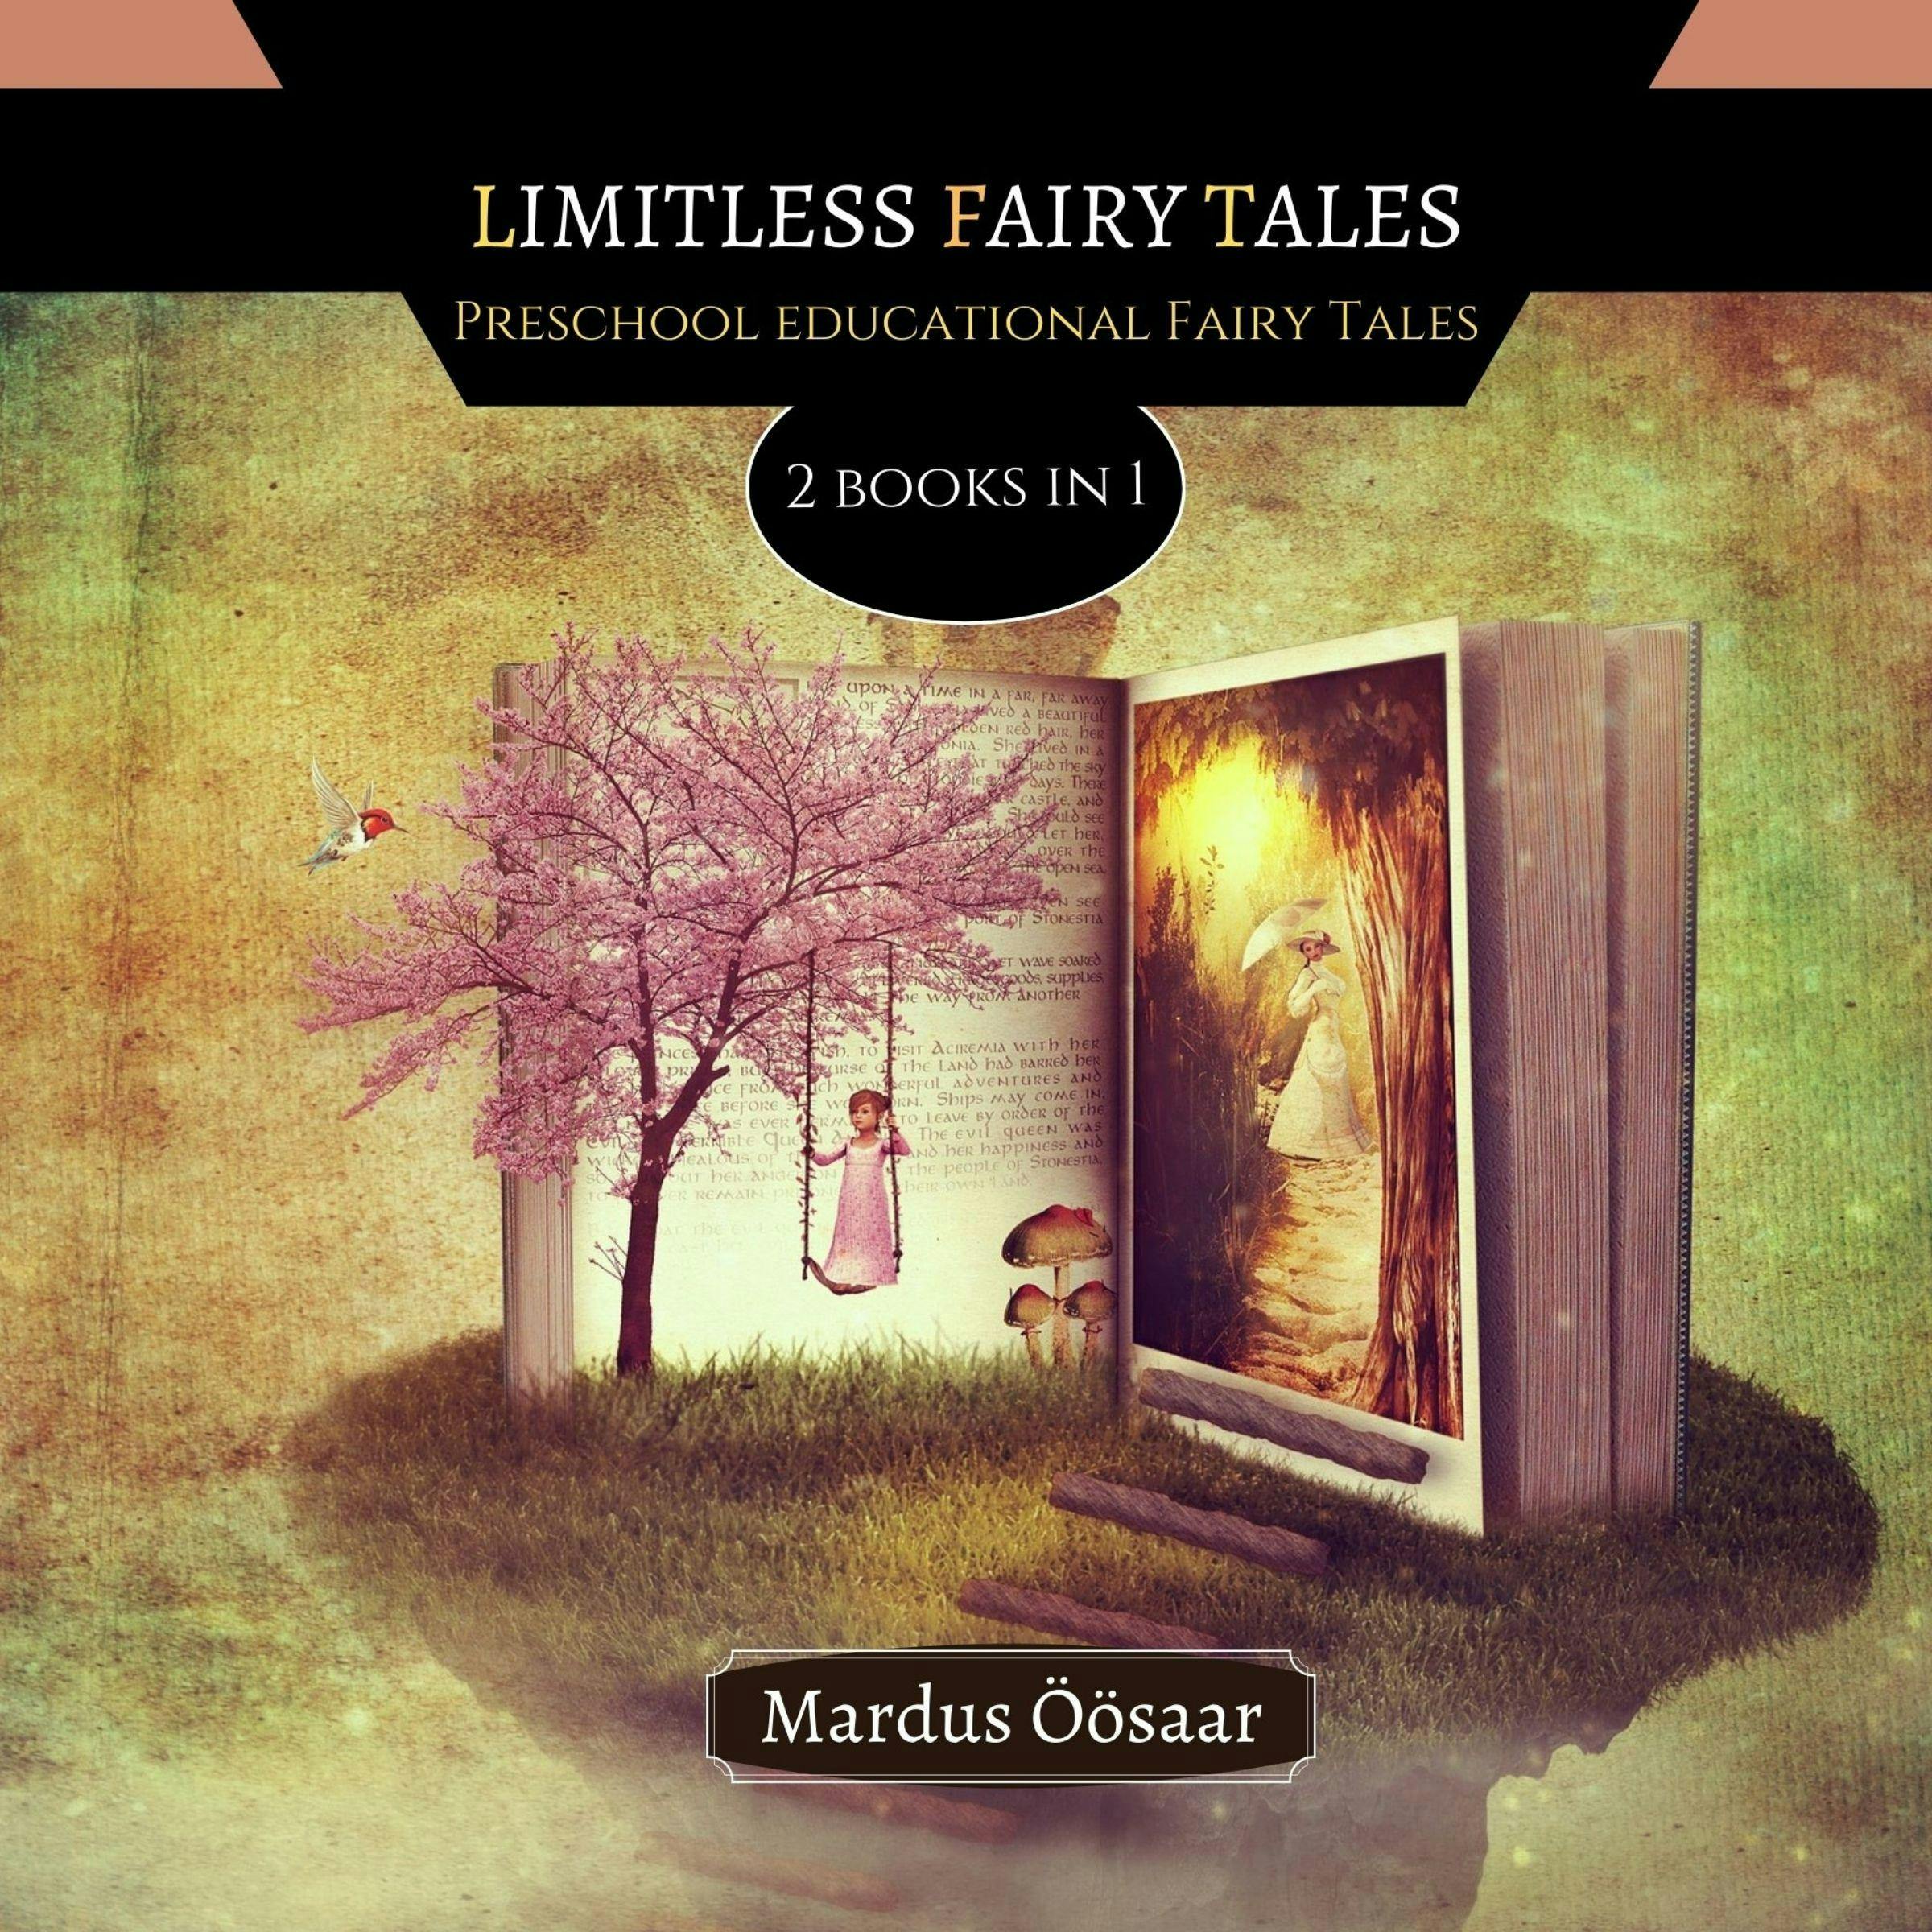 Limitless Fairy Tales - undefined